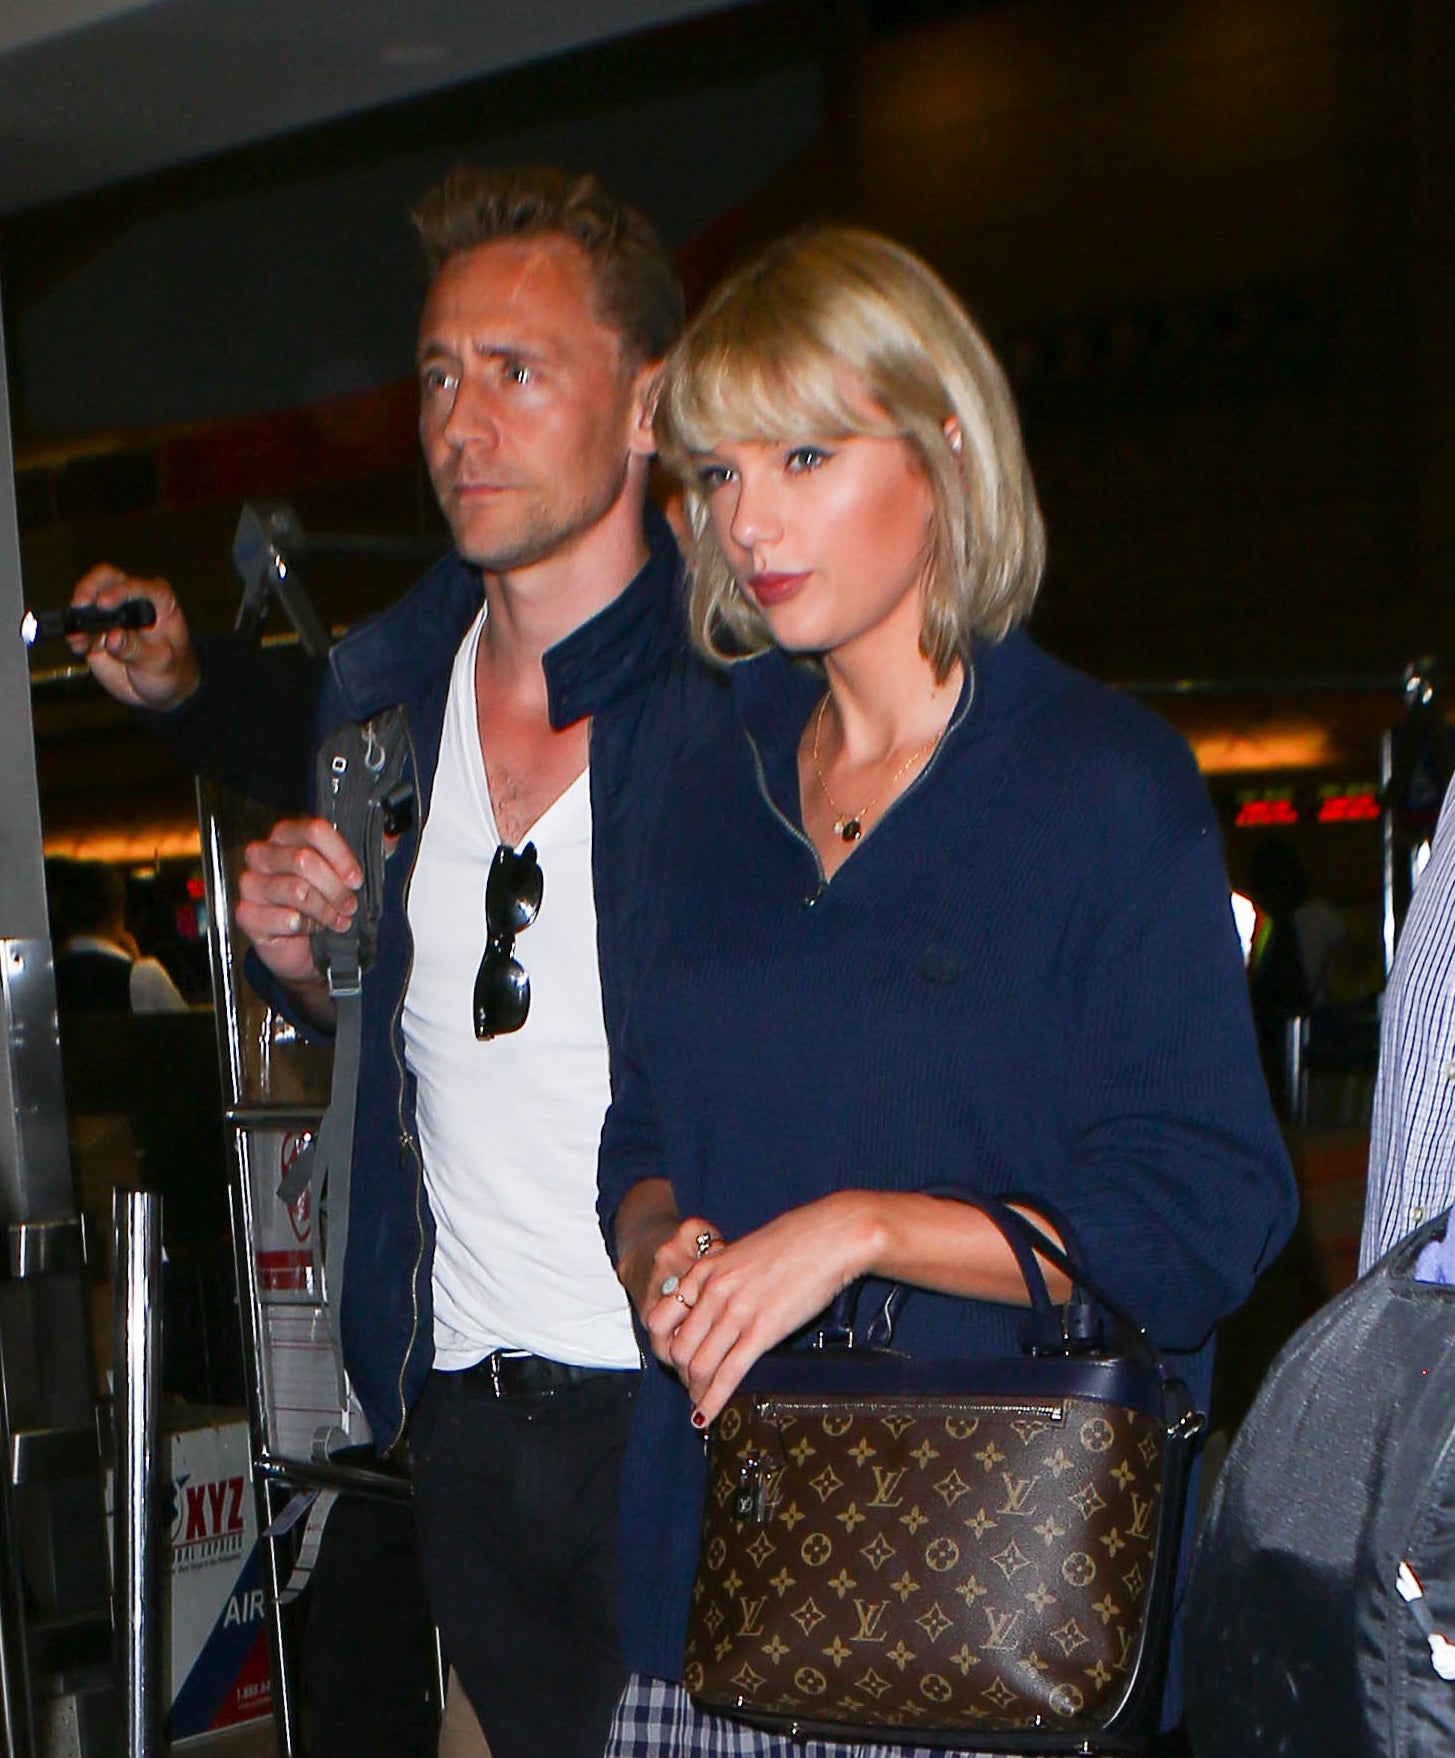 Taylor Swift in a navy top and plaid skirt with a shoulder bag, walking with Tom Hiddleston in a white shirt